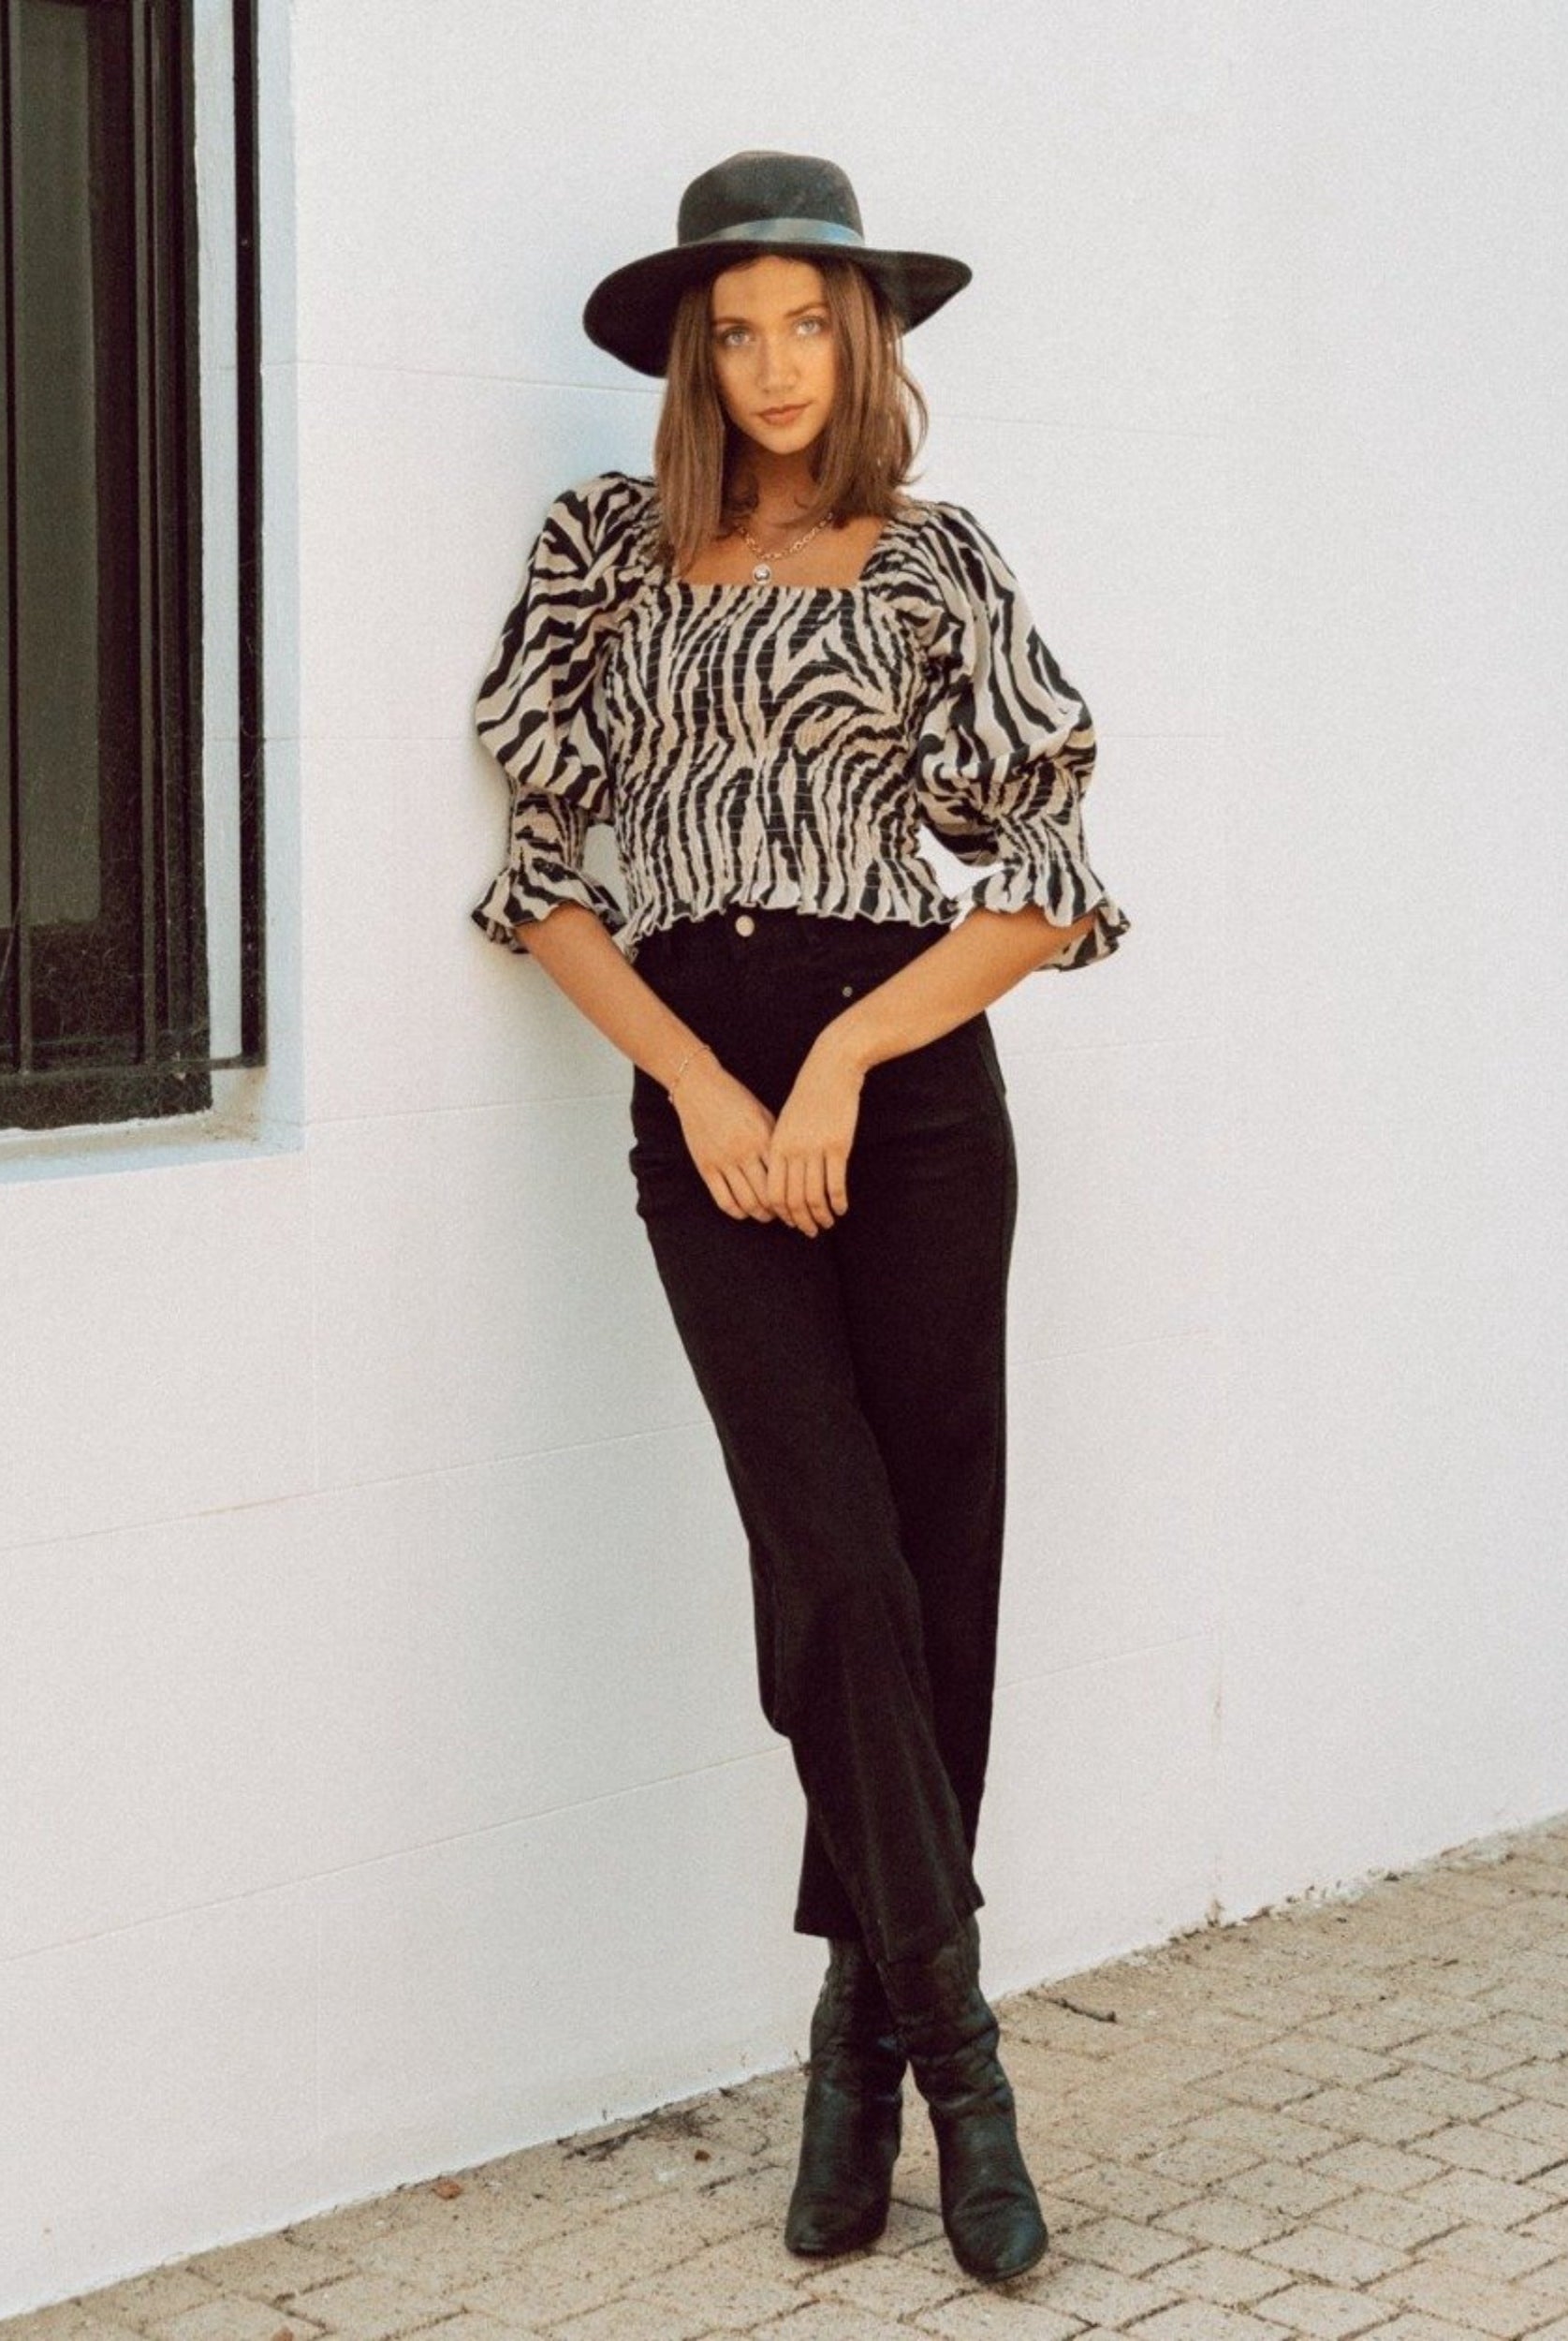 Woman wearing animal print top with black hat and black jeans